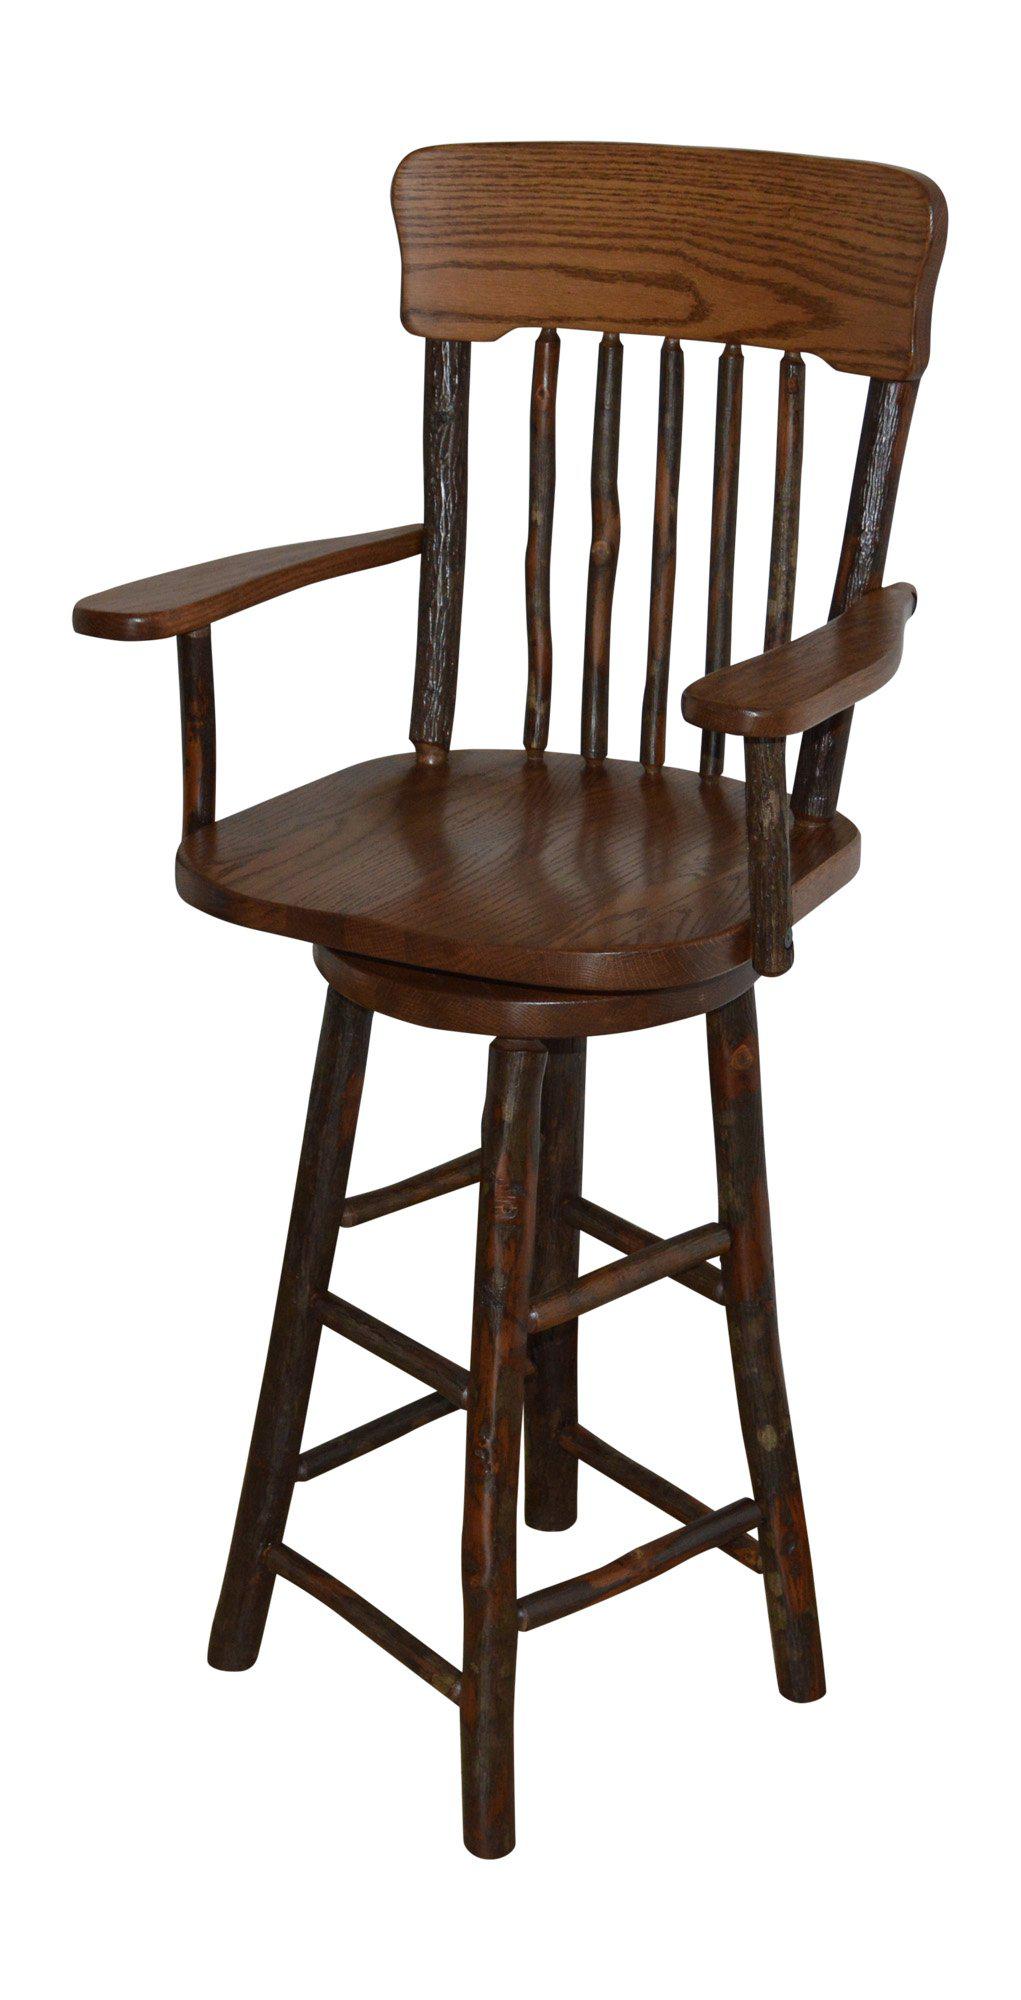 A&L Furniture Co. Hickory 3 Piece Bar table with Hickory Panel Back Swivel Barchairs - LEAD TIME TO SHIP 4 WEEKS OR LESS